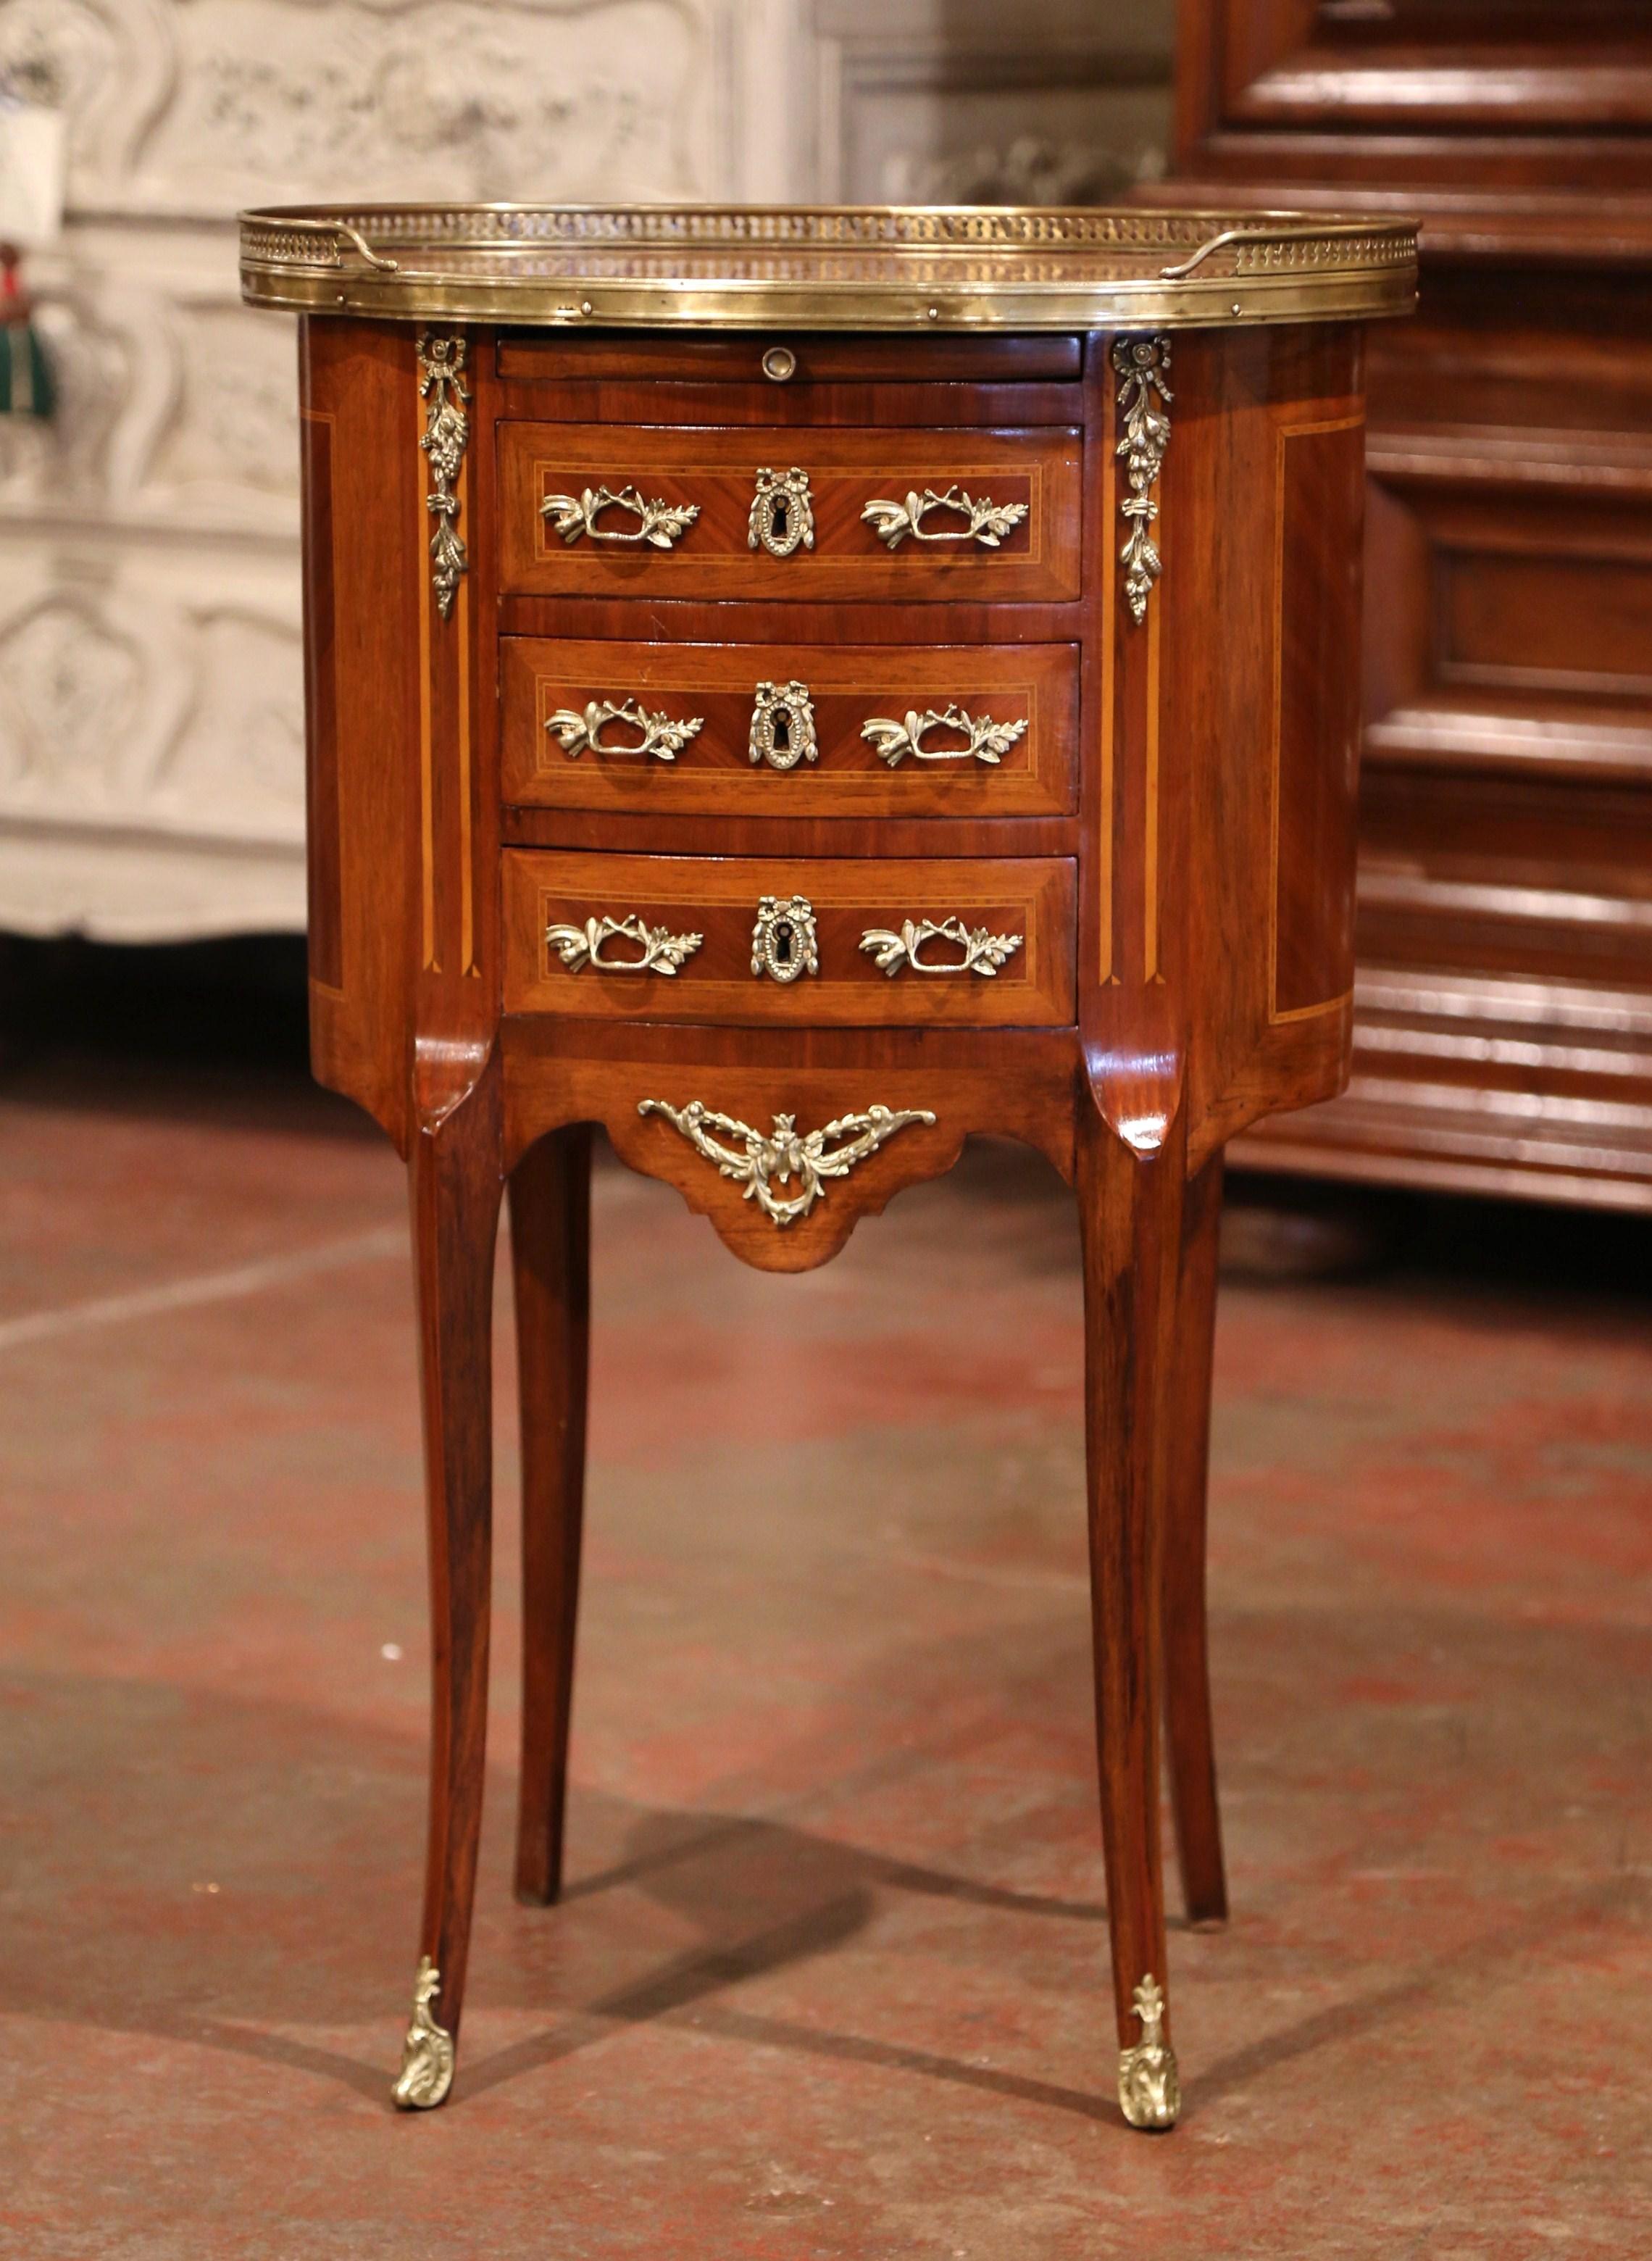 Crafted in Paris, France, circa 1890 and oval in shape, this elegant fruitwood petite commode stands on cabriole legs with front feet brass mounts, over a scalloped apron dressed with a decorative brass motif; the chest features three drawers across